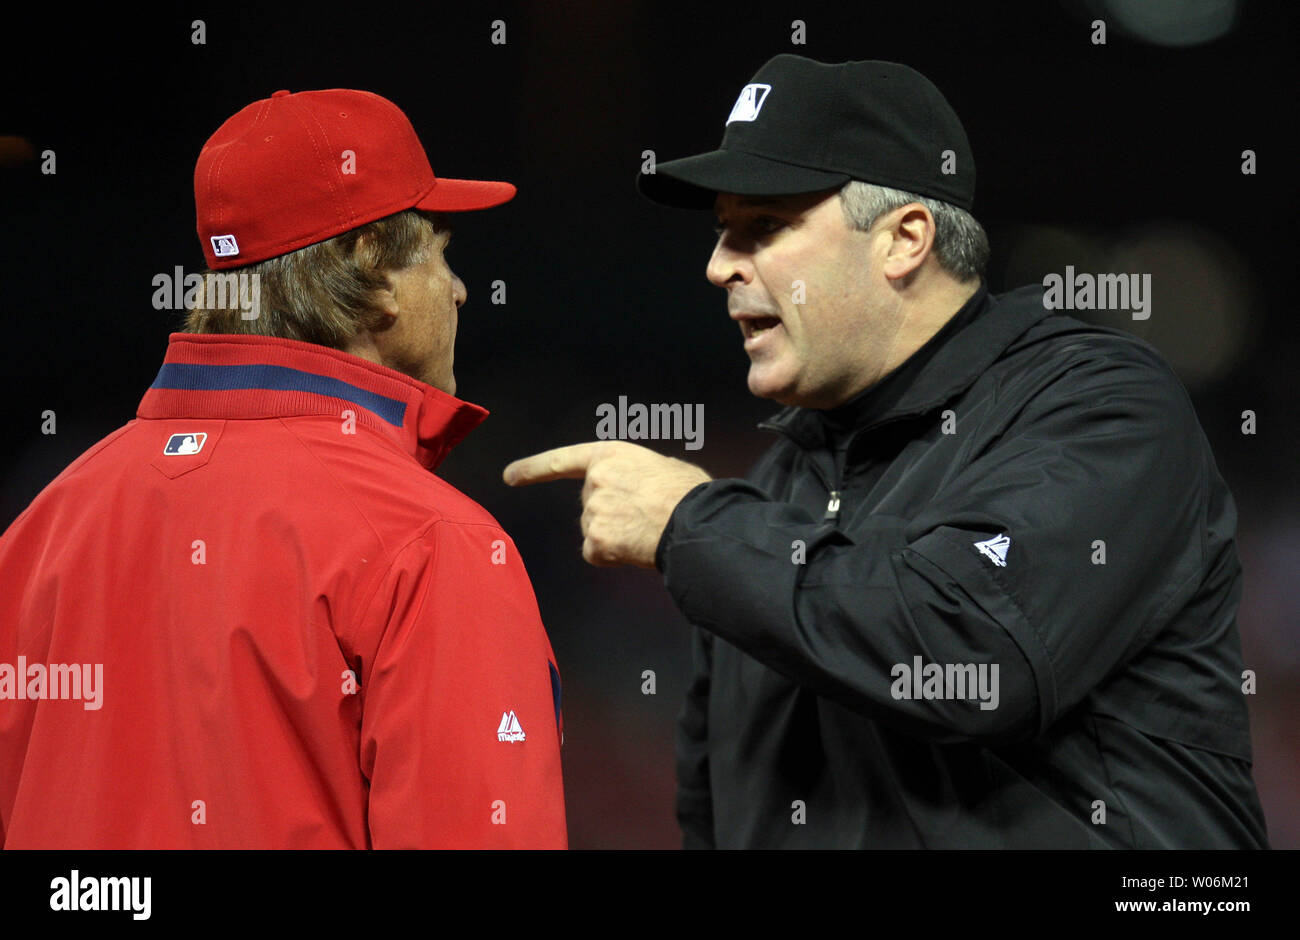 Umpires Laz Diaz and Mike Estabrook (L) comment to St. Louis Cardinals  manager Mike Matheny about the blue uniforms before a game against the  Milwaukee Brewers at Busch Stadium in St. Louis